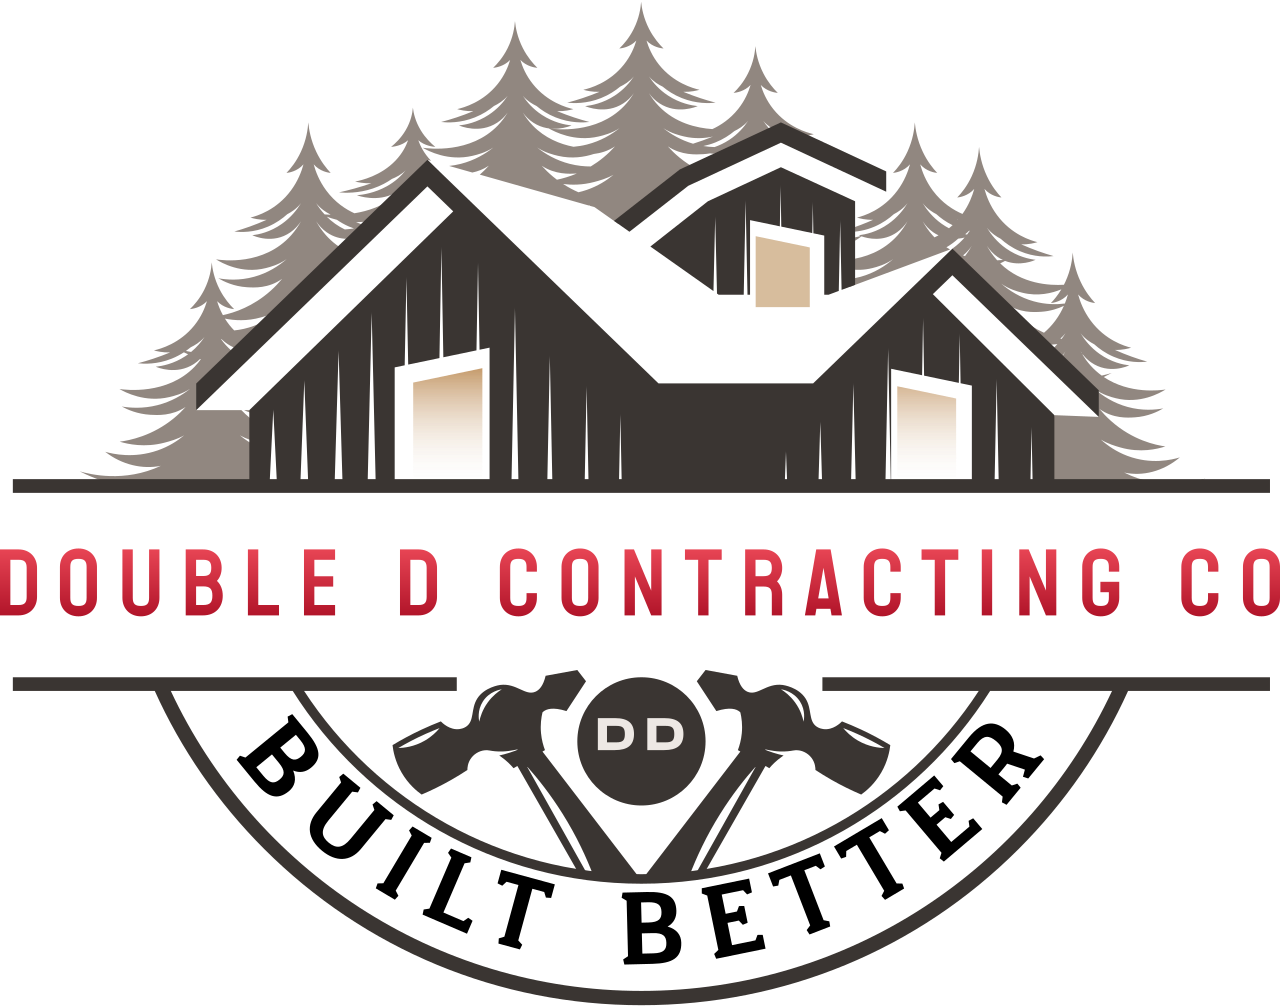 Double D Contracting Co's logo